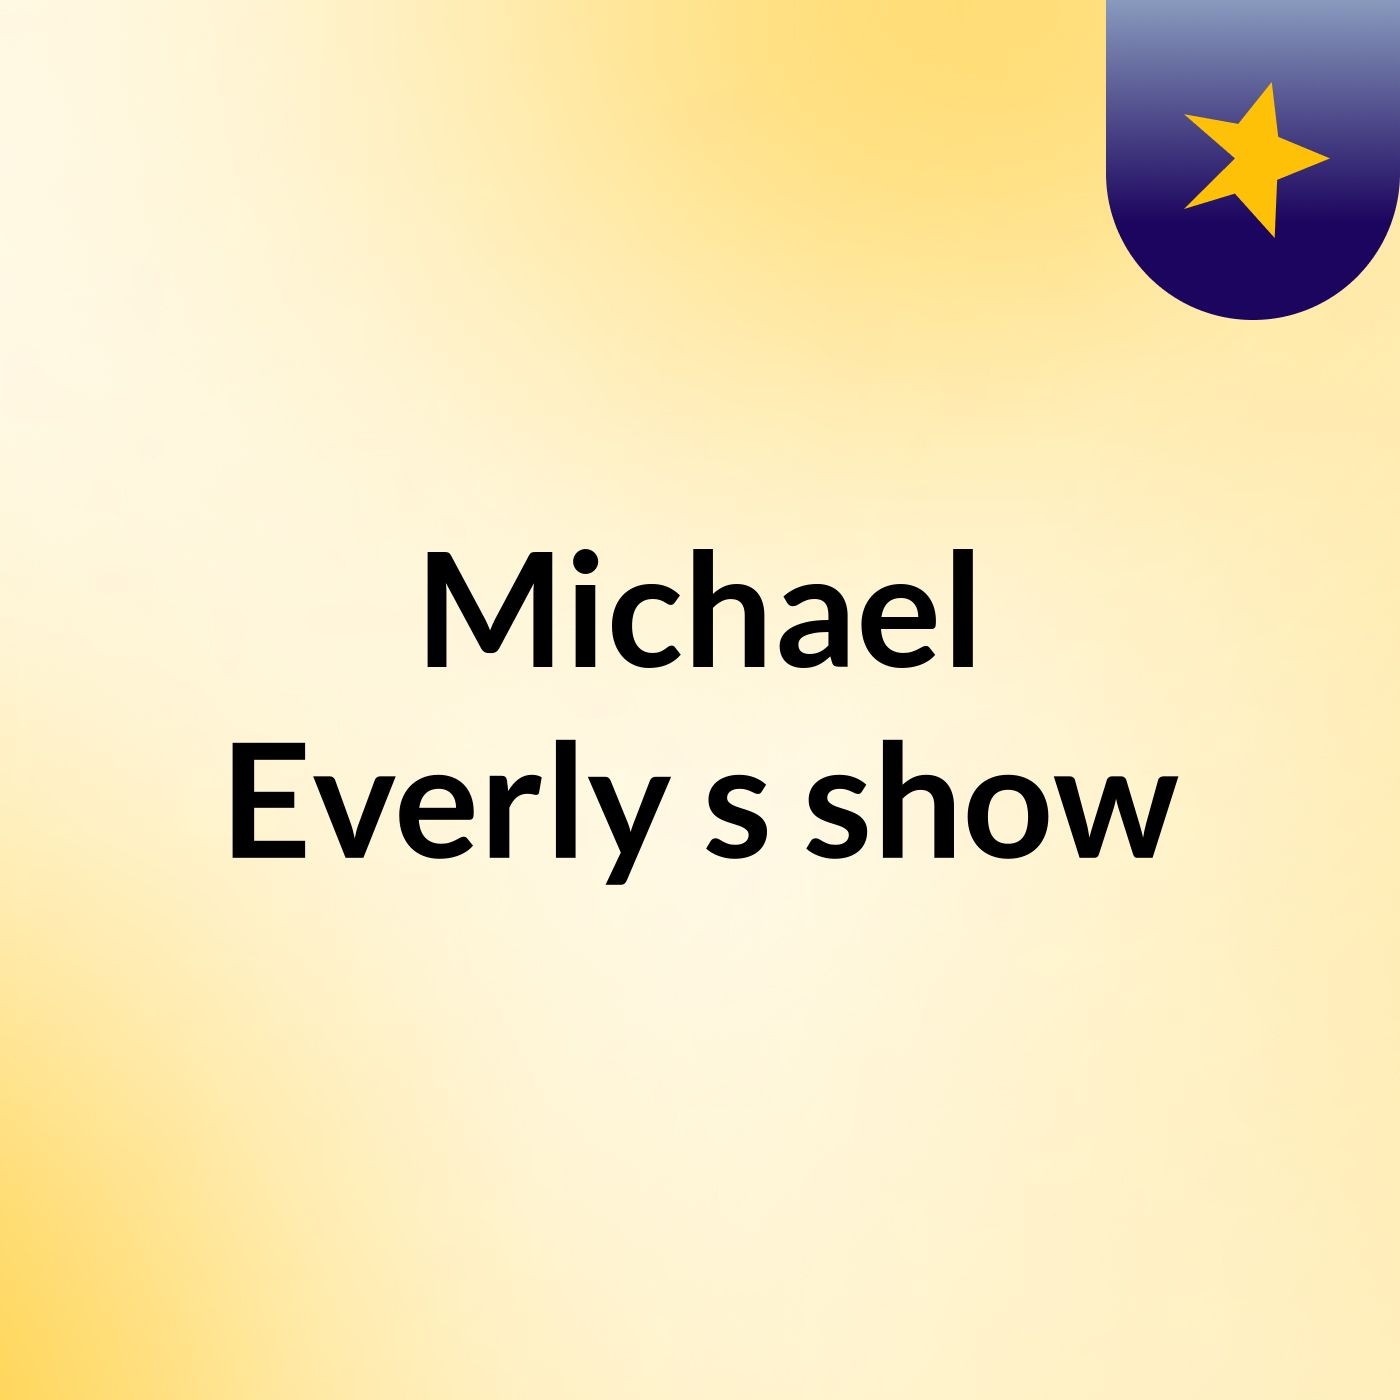 Episode 2 - Michael Everly's show